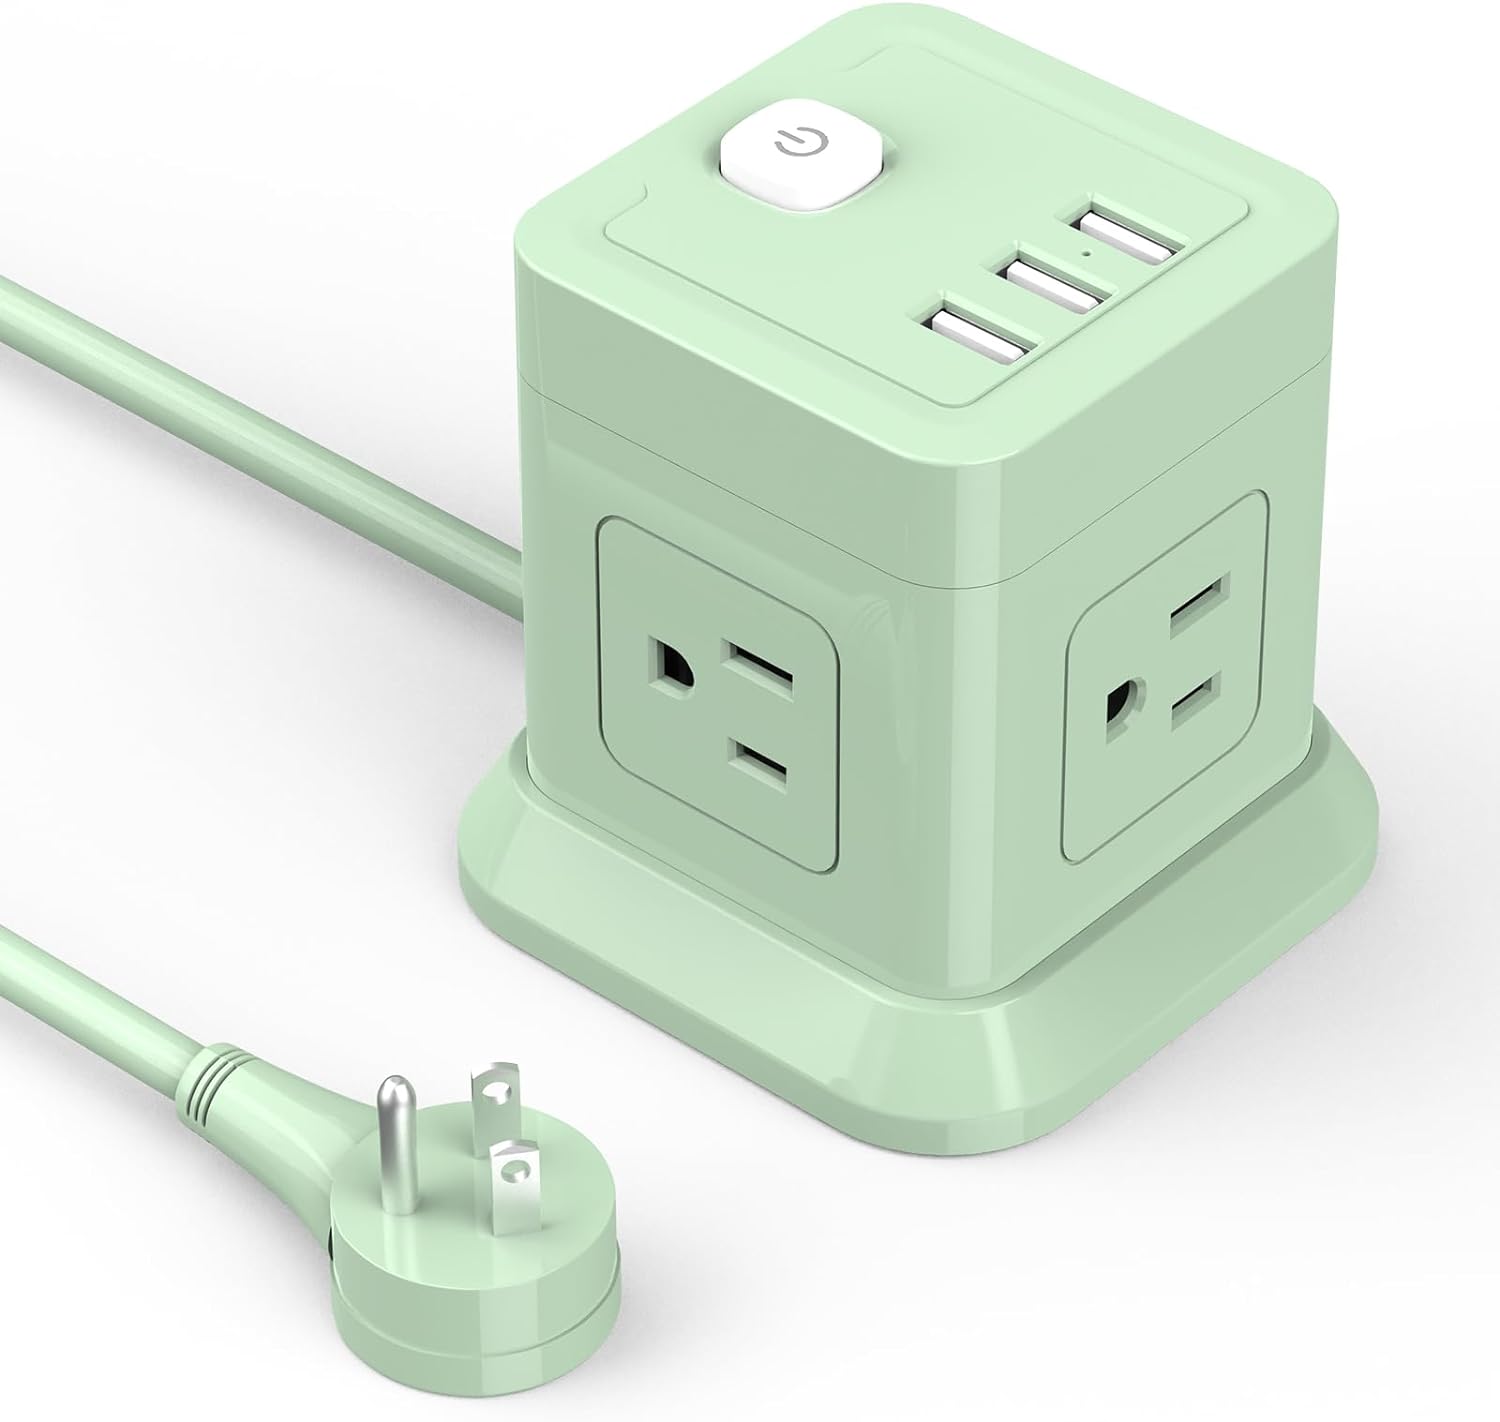 Cube Power Strip, FDTEK 4 Widely Spaced Outlet with 3 USB Flat Plug Power Strips with Long Extension Cords Space Save Compact Portable Power Station for Travel Home Office Cruise (Green 5 ft)